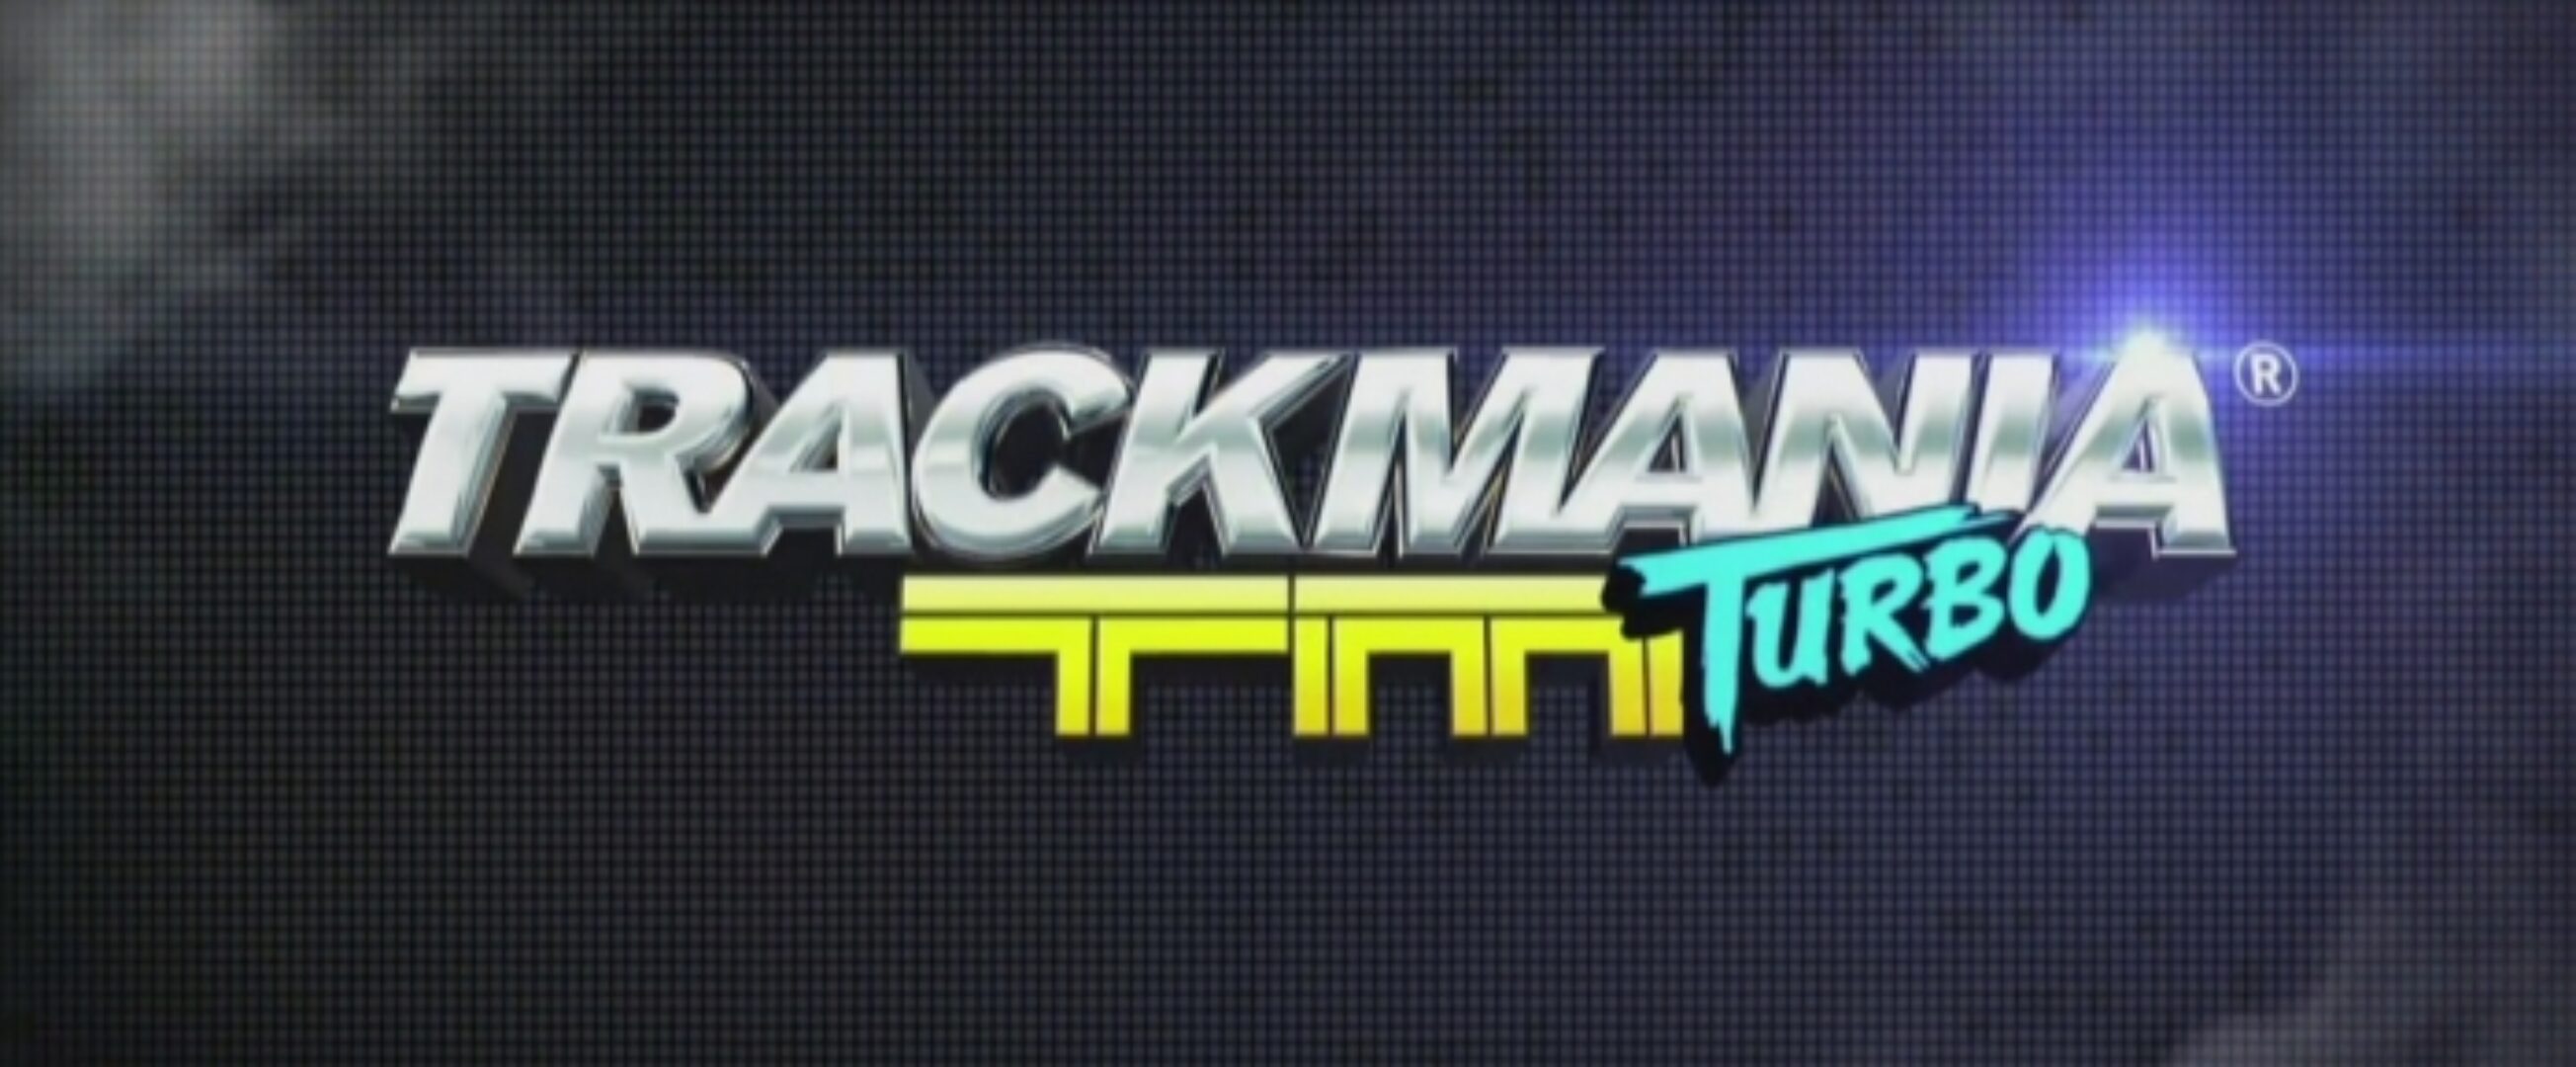 E3 2015: Start Your Engines, Trackmania Turbo Announced